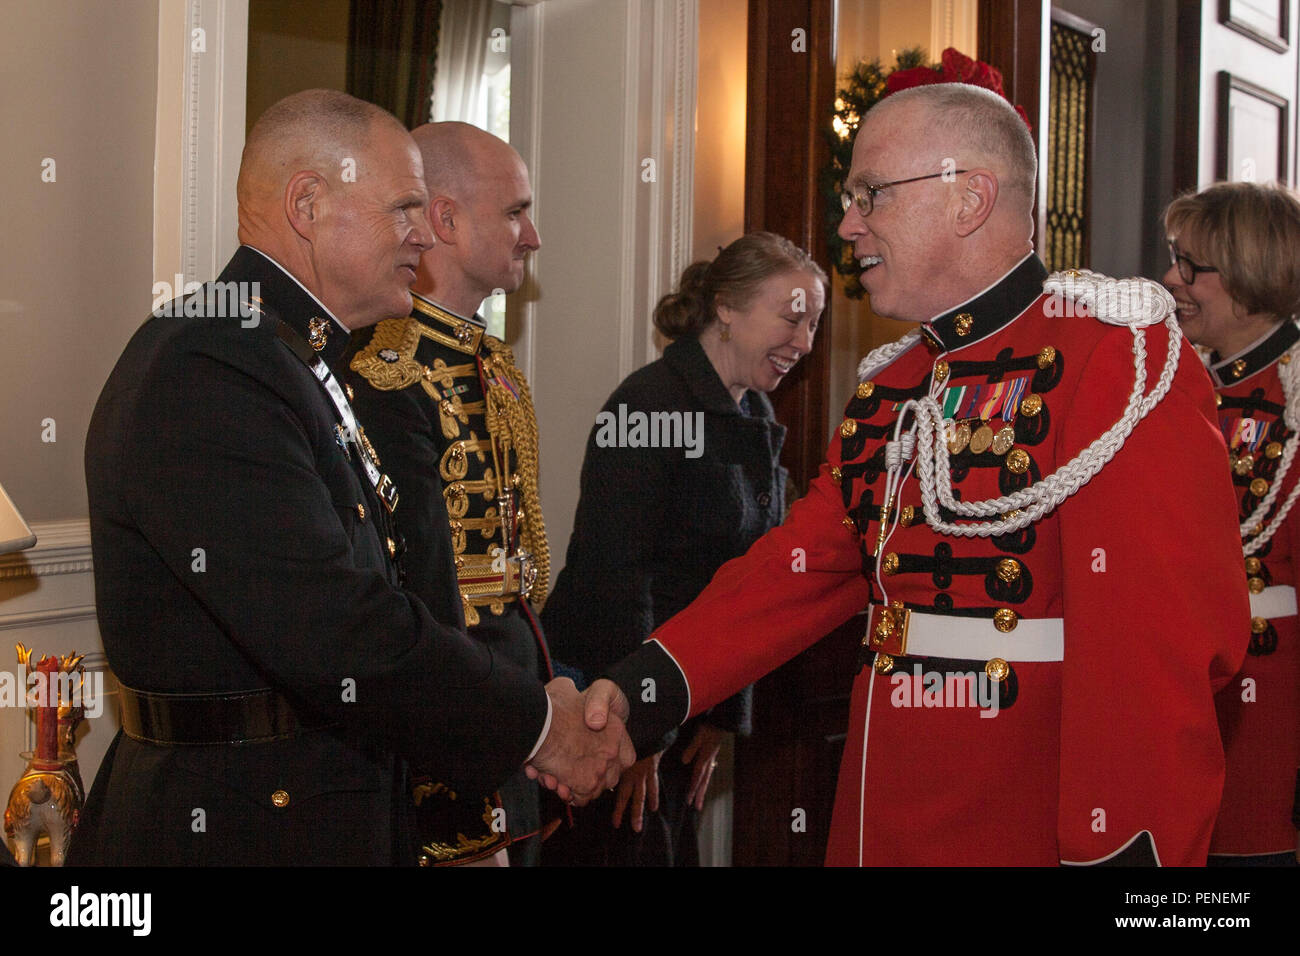 The Commandant of the Marine Corps, Gen. Robert B. Neller, left, greets a member of the U.S. Marine Corps Band during the annual New Year’s Day Serenade at the Home of the Commandants in Washington, D.C., Jan. 1, 2016. The serenade is a tradition that dates back to the 19th century. (U.S. Marine Corps photo by Cpl. Samantha K. Draughon/Released) Stock Photo